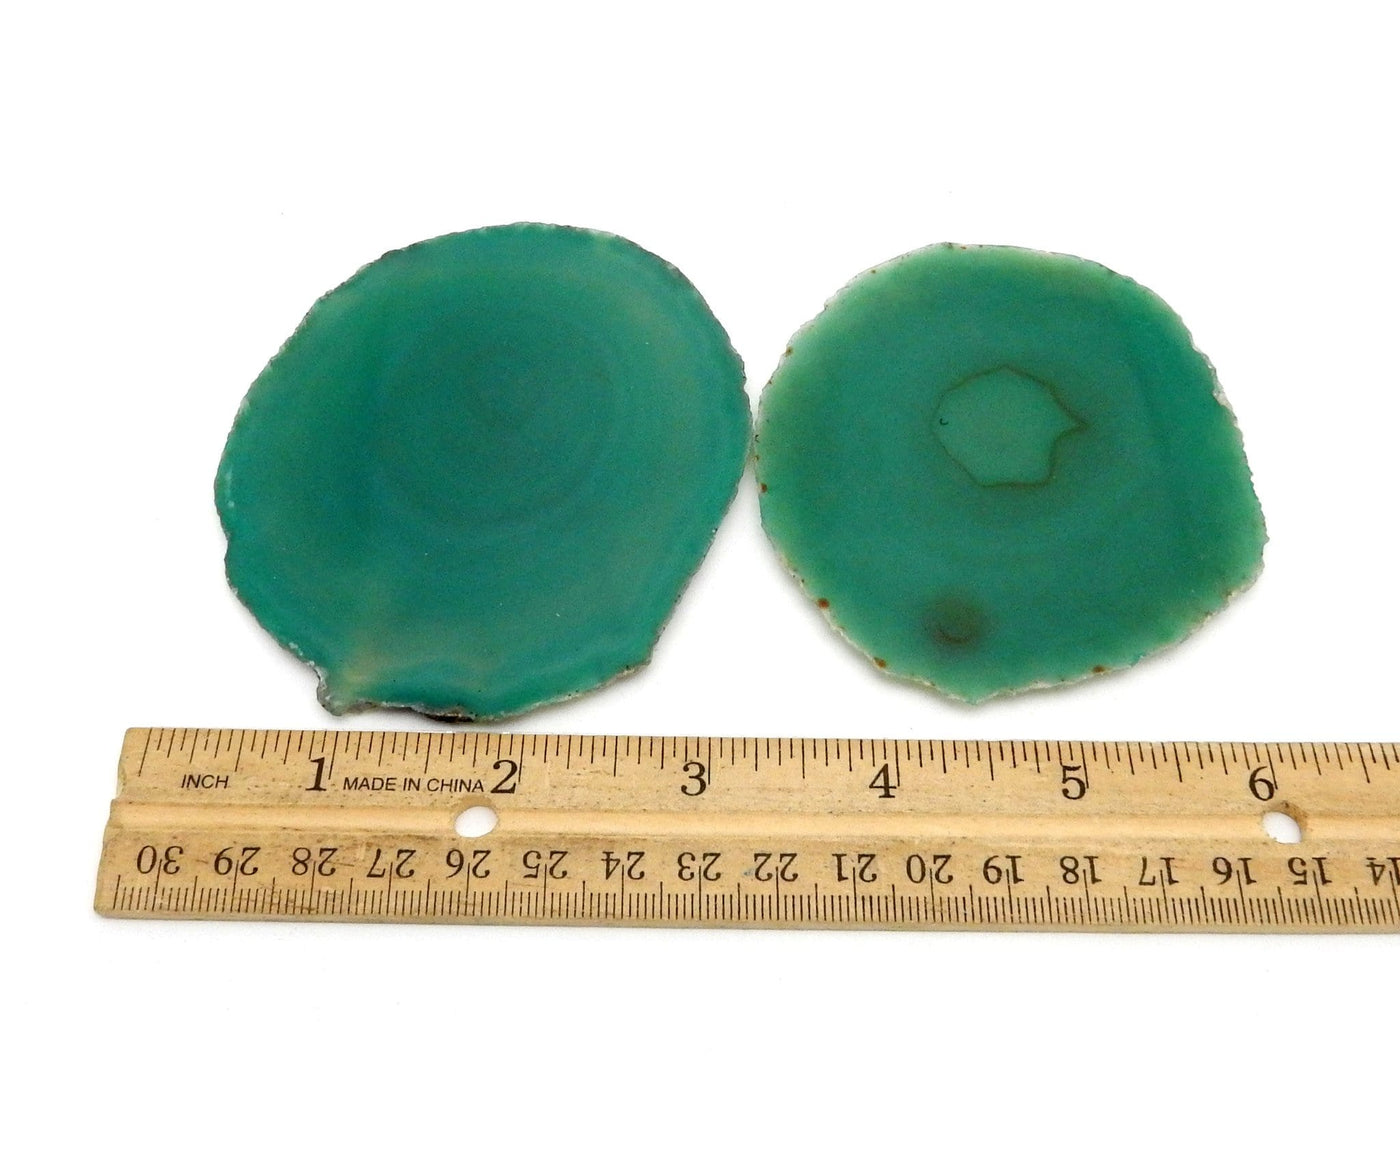 green agate slices next to a ruler for size reference 